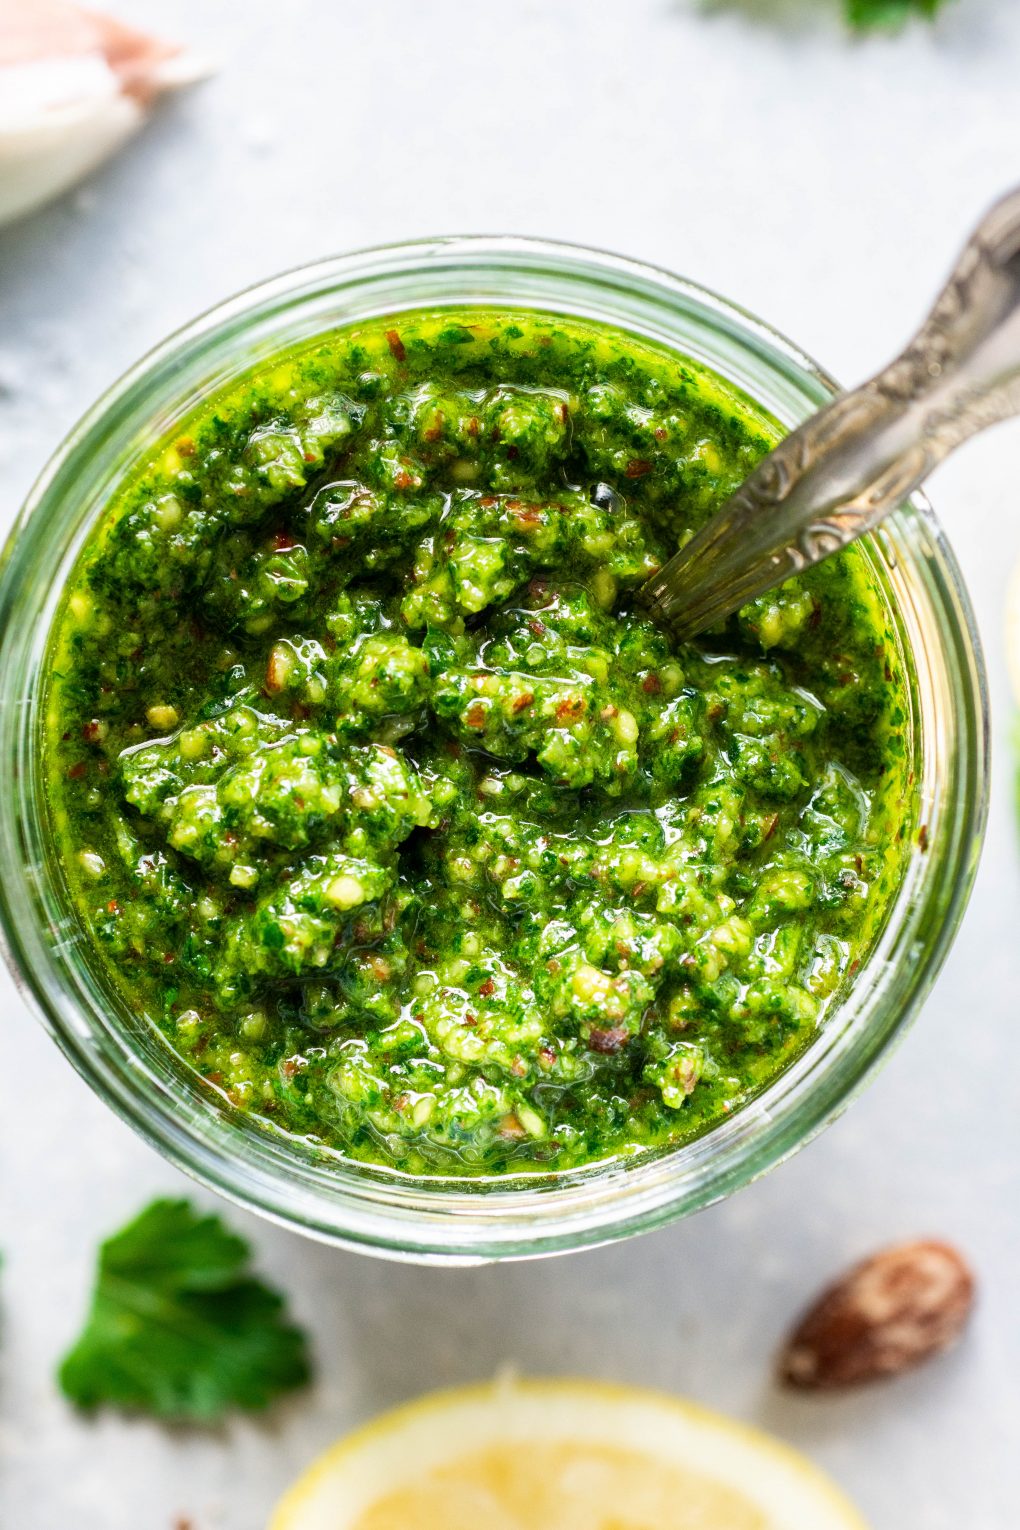 Close up shot of a glass jar of bright green kale pesto with a spoon. On a light colored background next to some fresh parsley leaves.